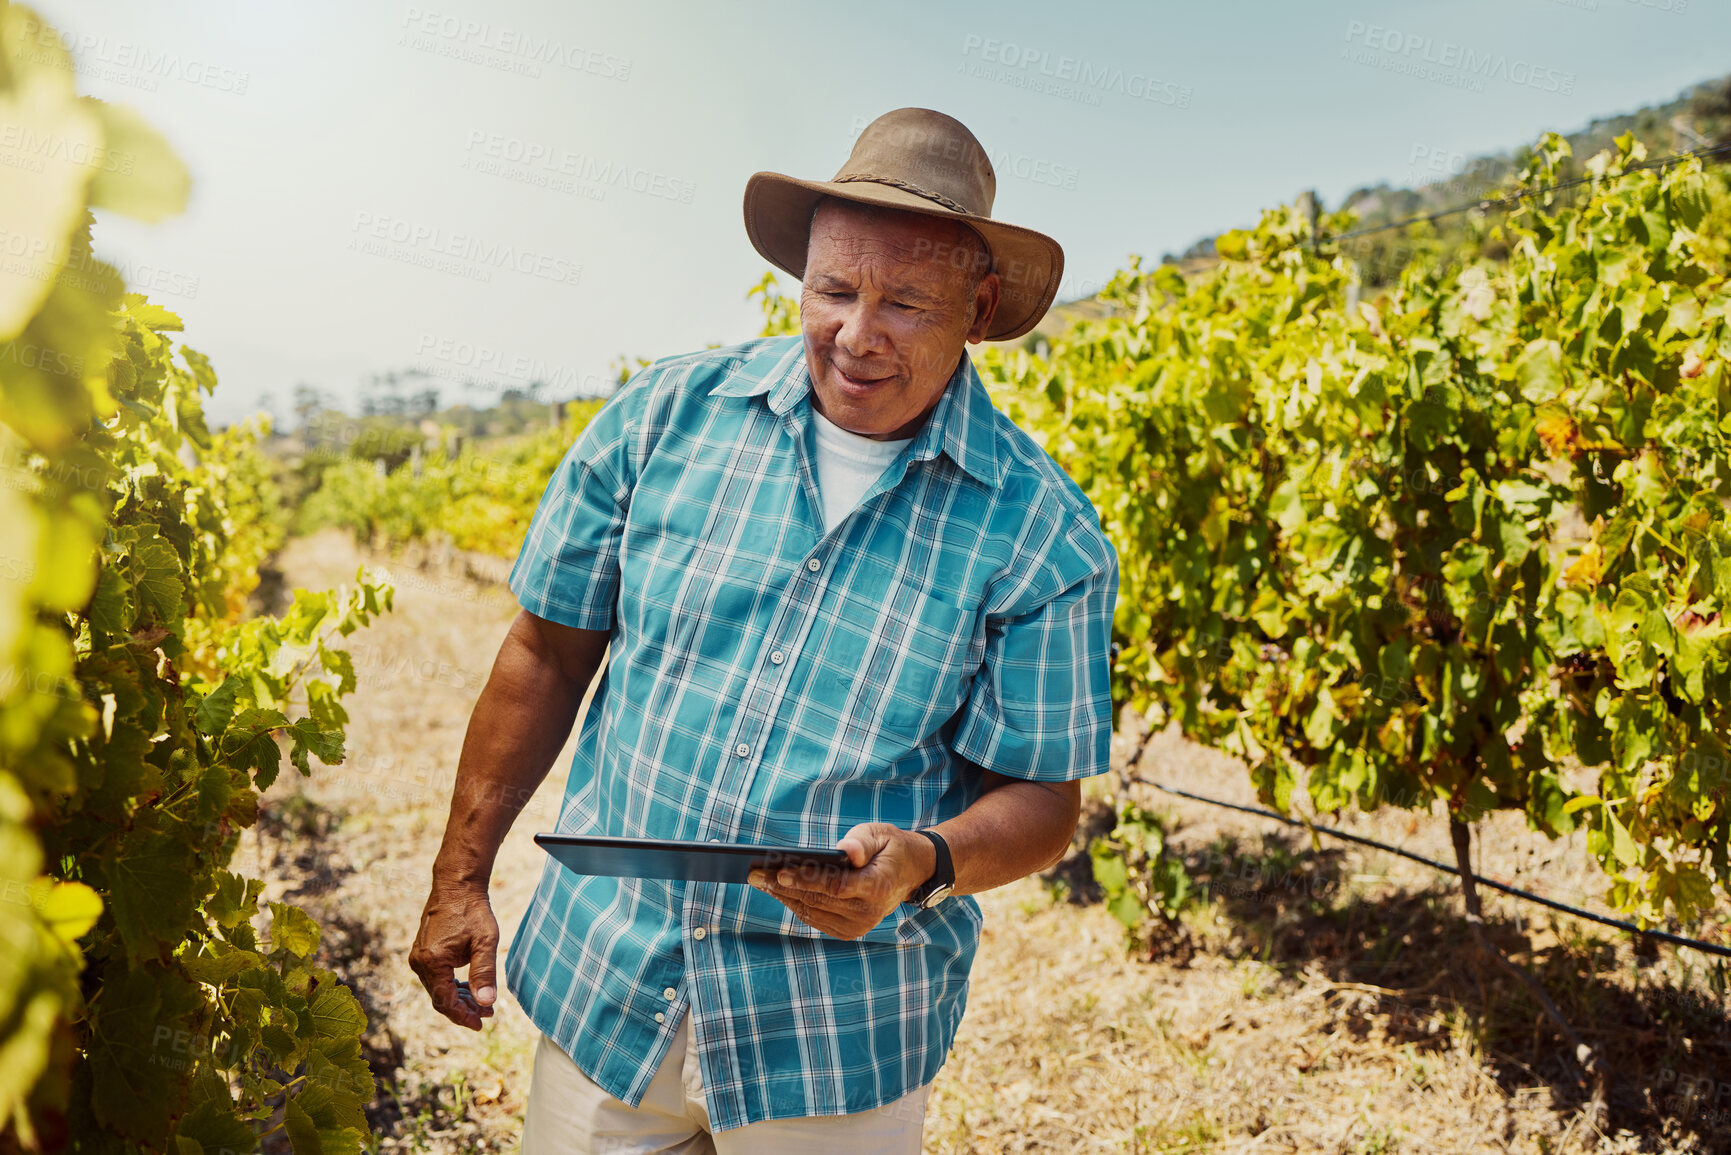 Buy stock photo Smiling senior mixed race farmer using a digital tablet on his vineyard. Elderly hispanic man standing alone and using technology on a wine farm in summer. Happy farmer with his crops and agriculture